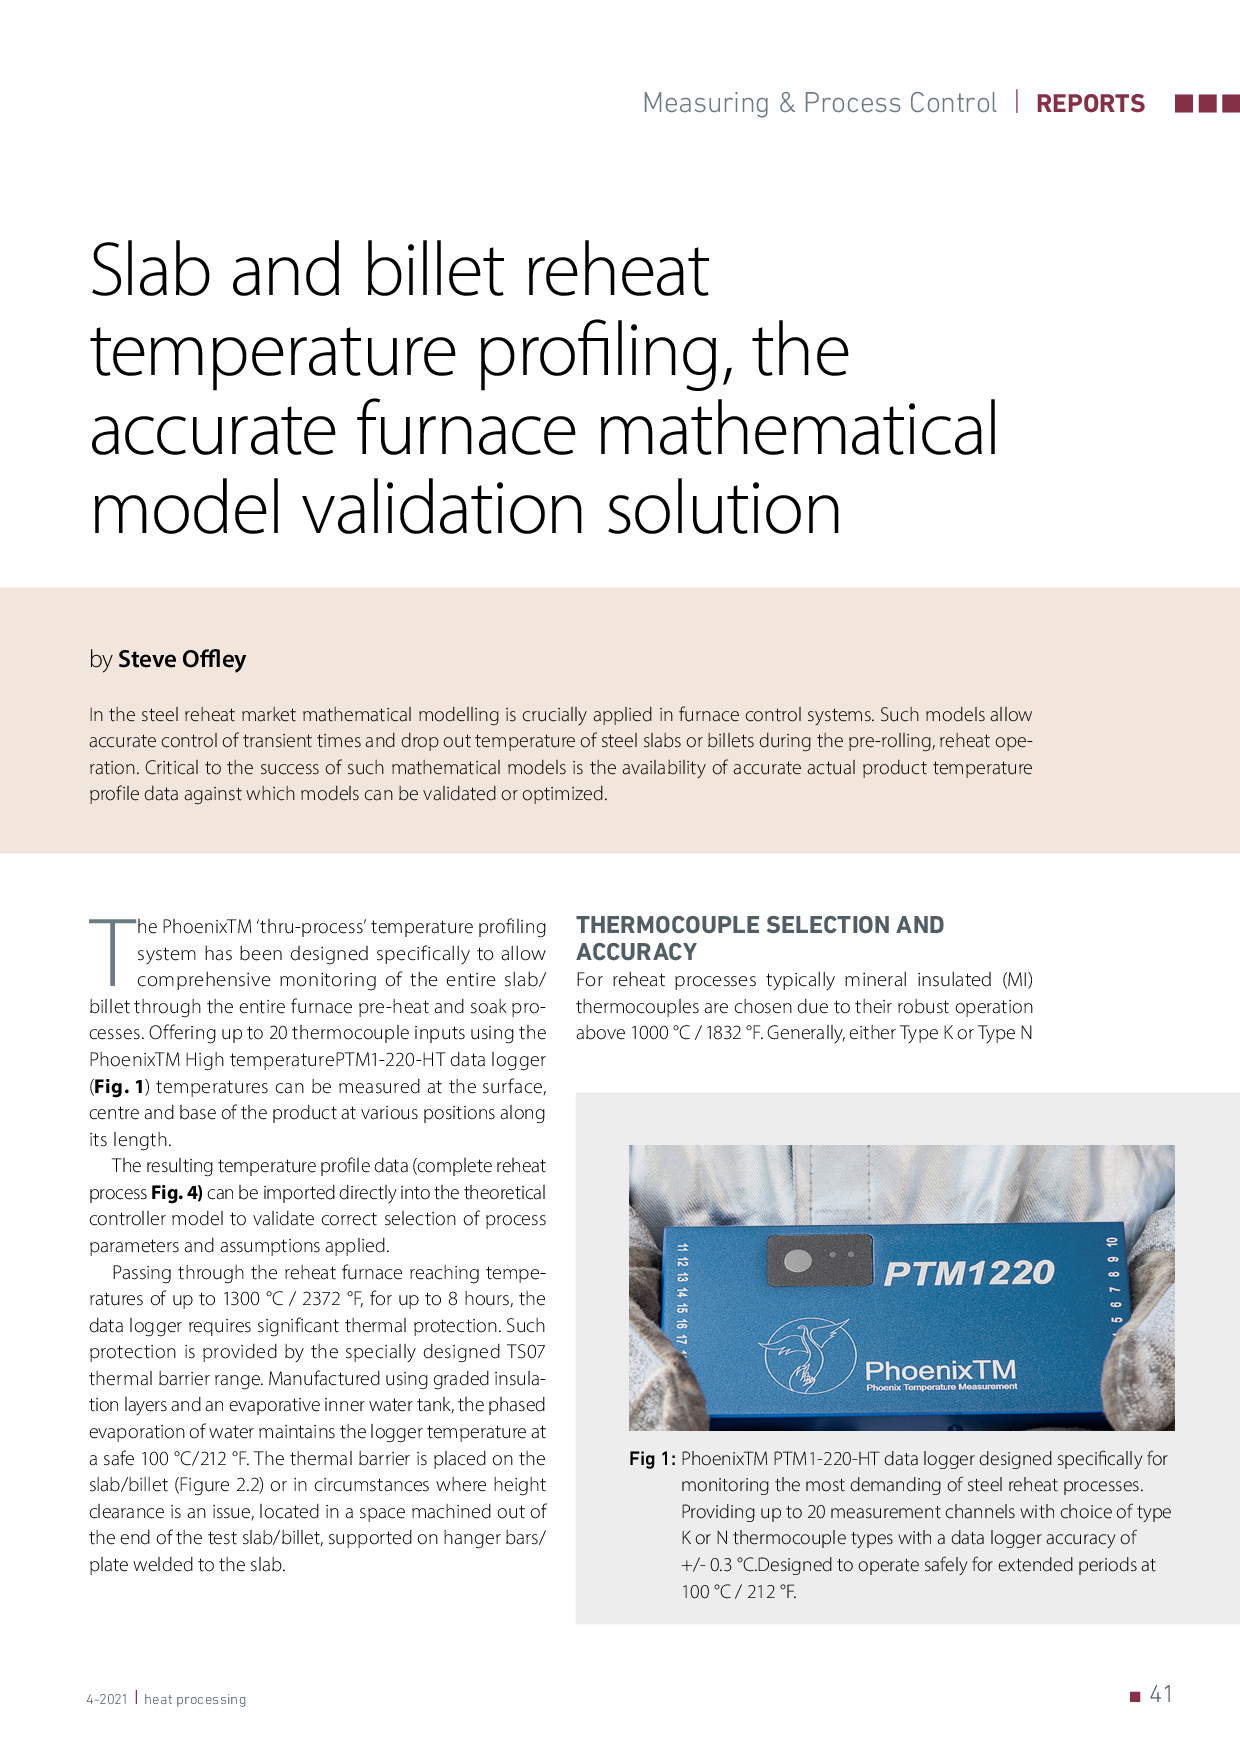 Slab and billet reheat temperature profiling, the accurate furnace mathematical model validation solution